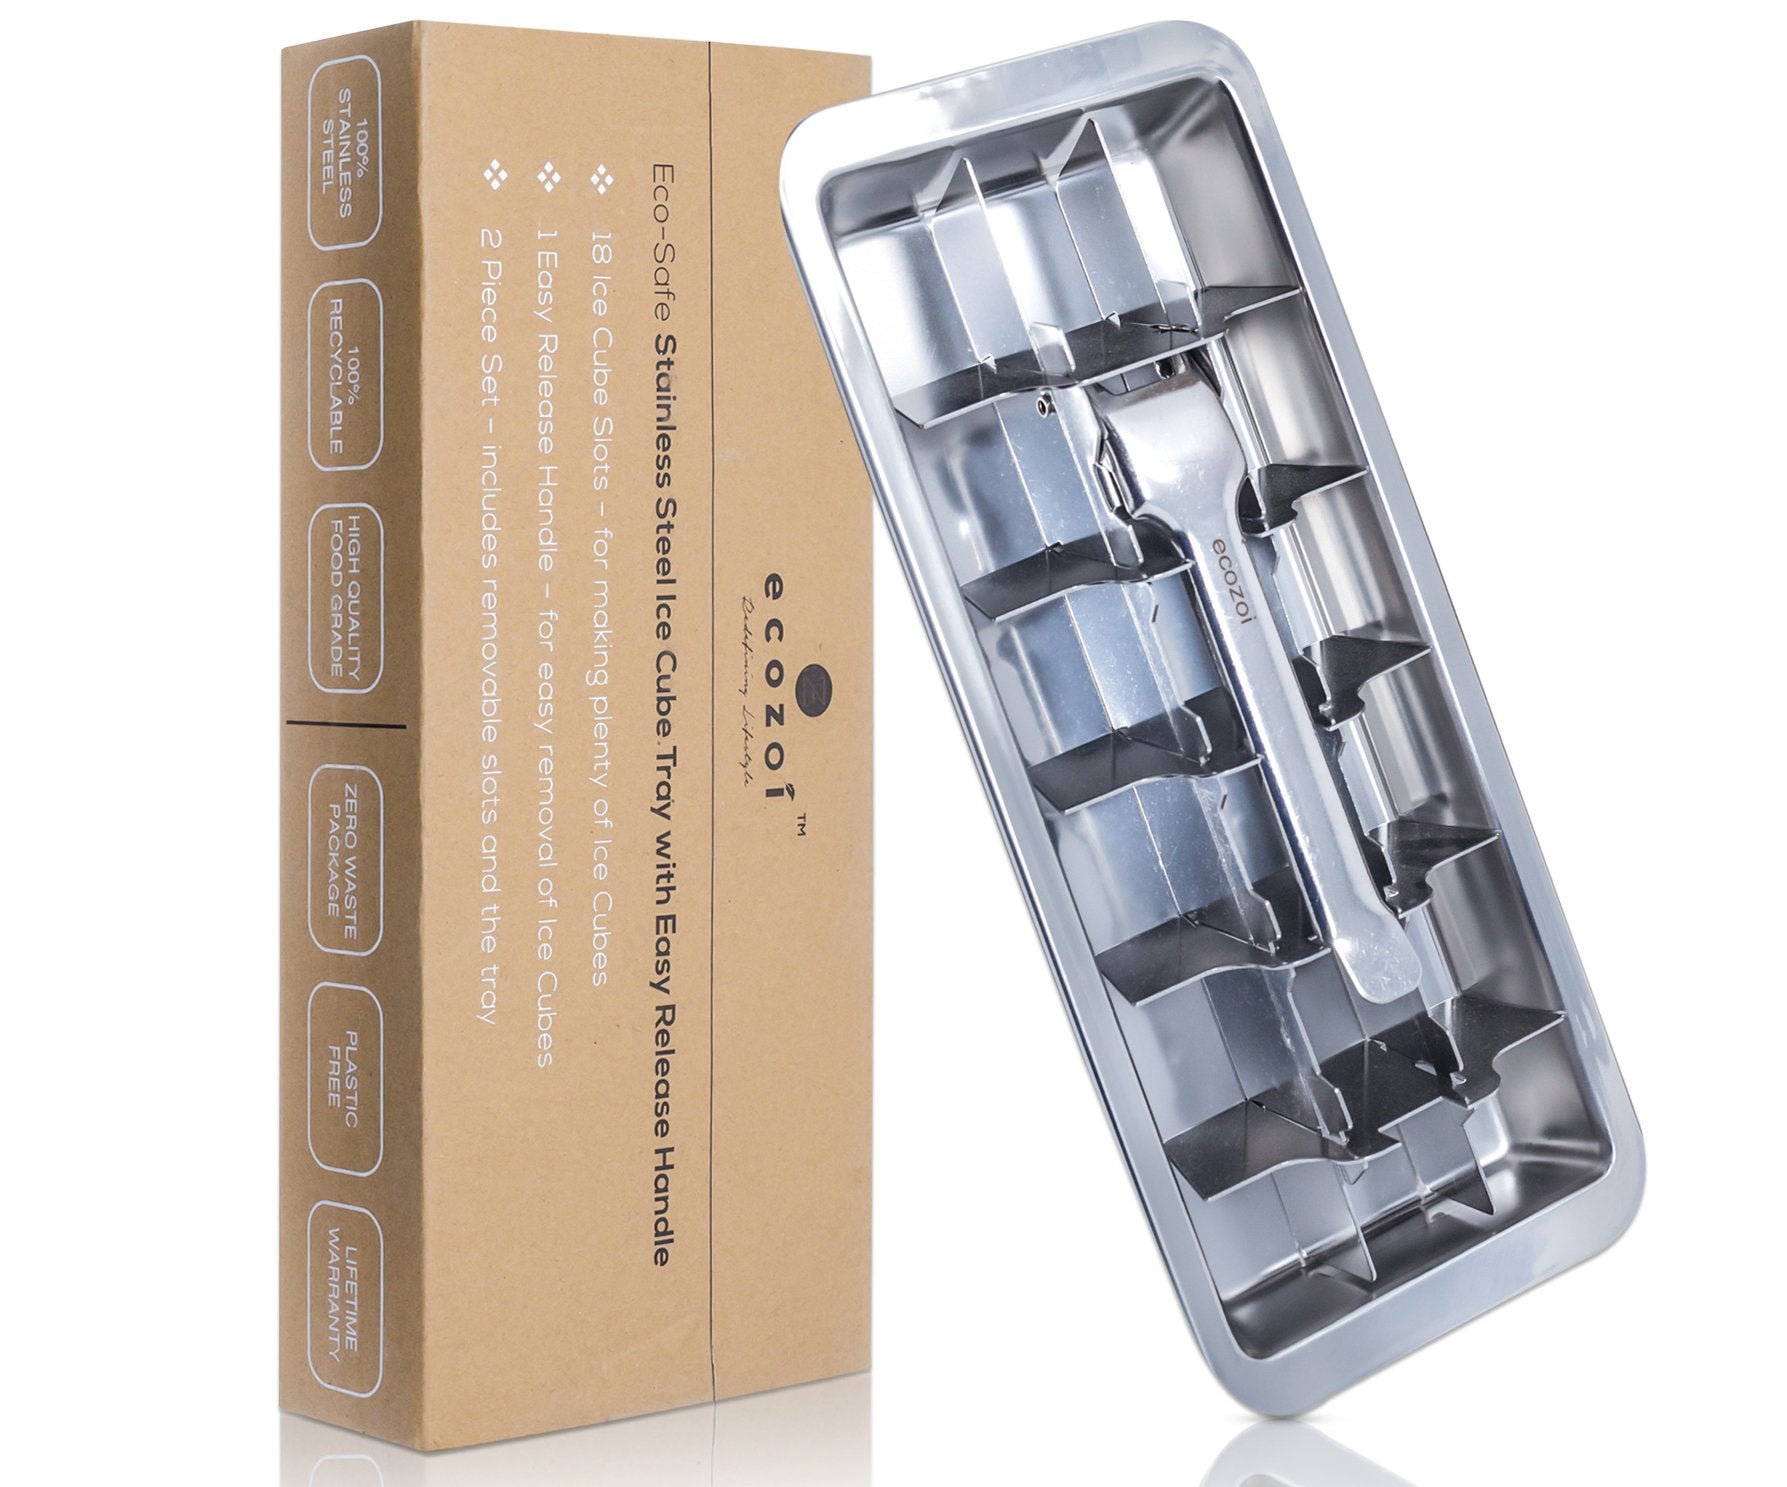 Onyx Stainless Steel Ice Cube Tray Review 